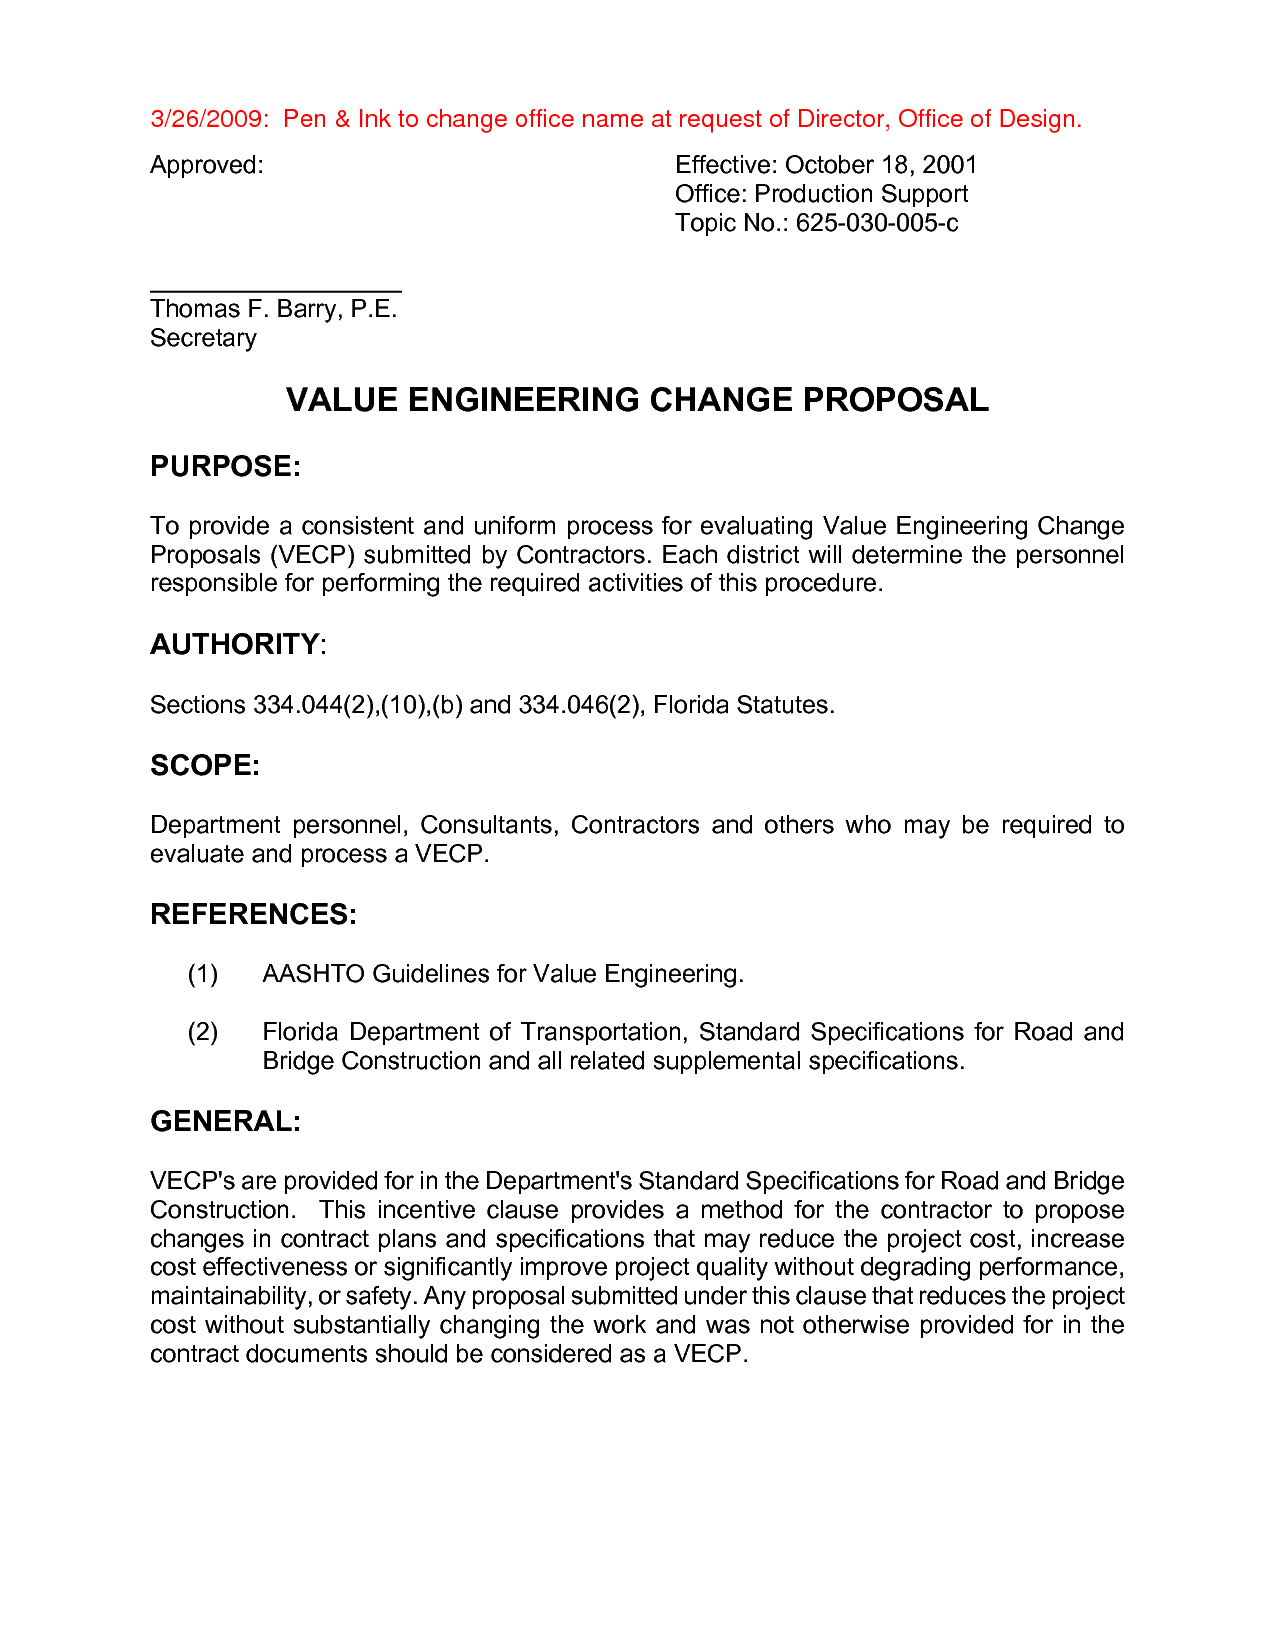 20 Engineering Design Proposal Template Images - Network Design Pertaining To Engineering Proposal Template